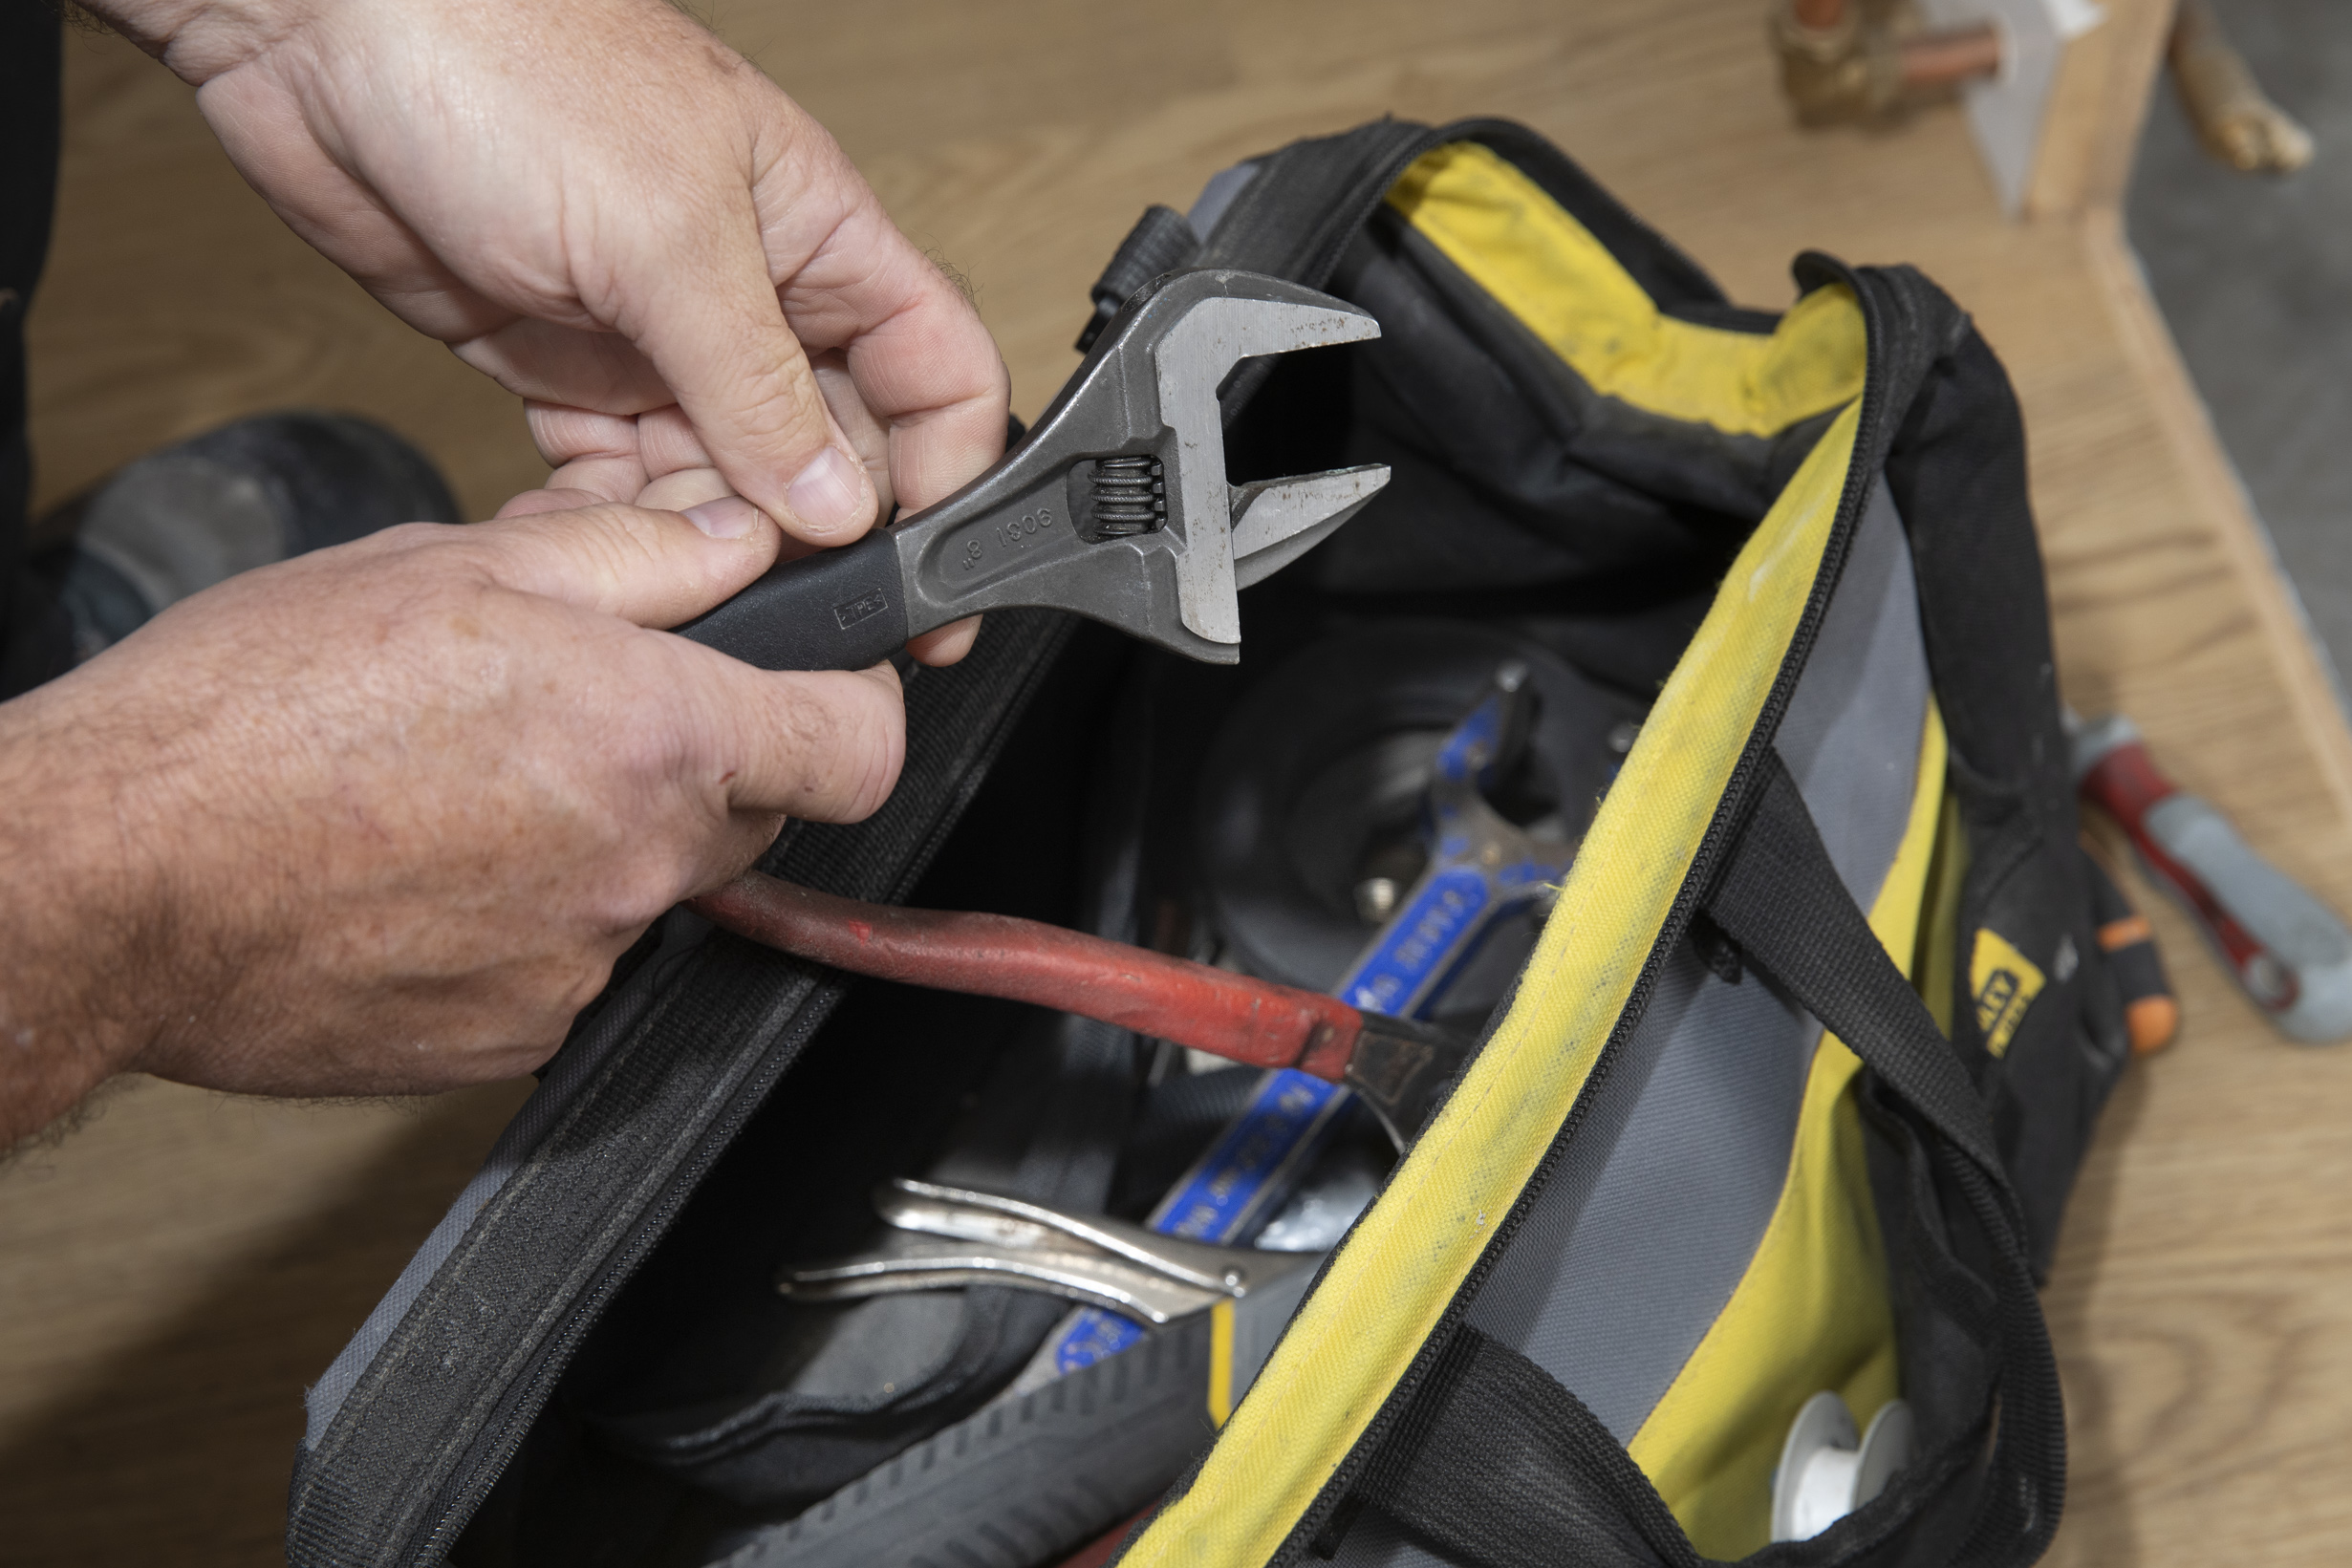 Persons hands taking adjustable wrench out of toolbox